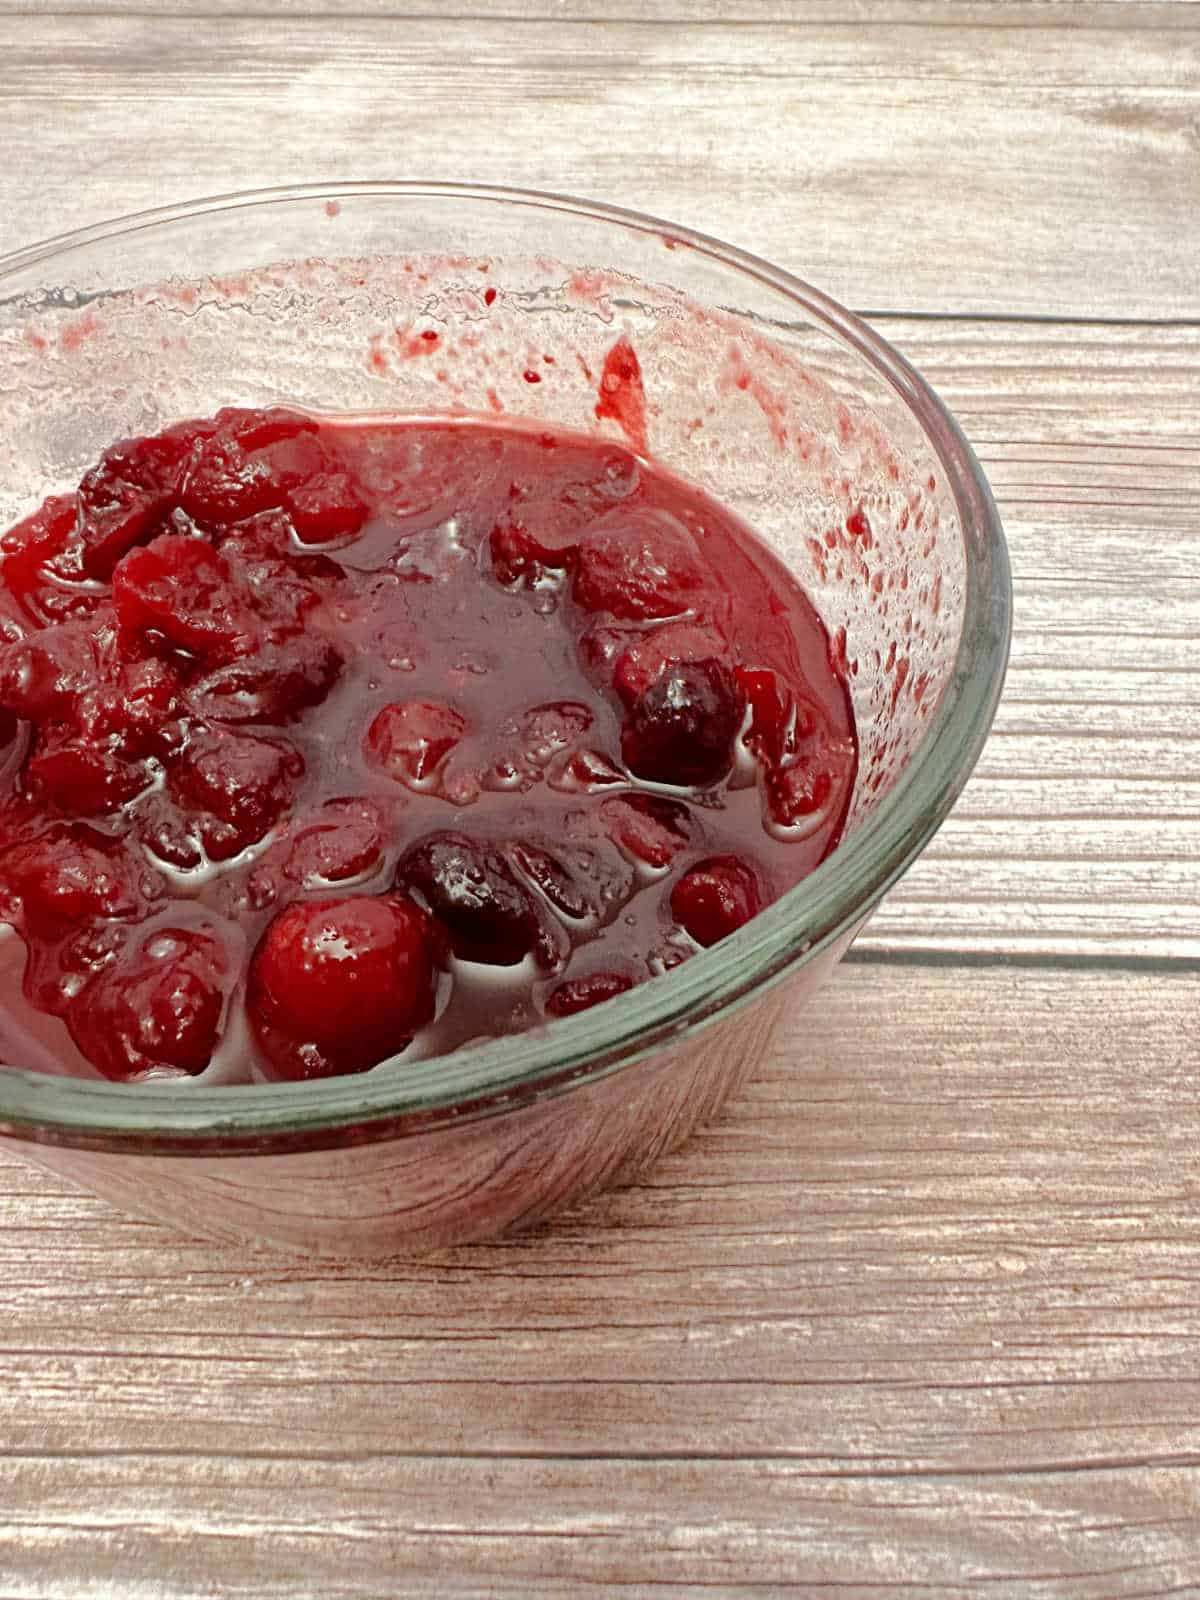 Cranberry sauce in a glass dish on a wooden background.